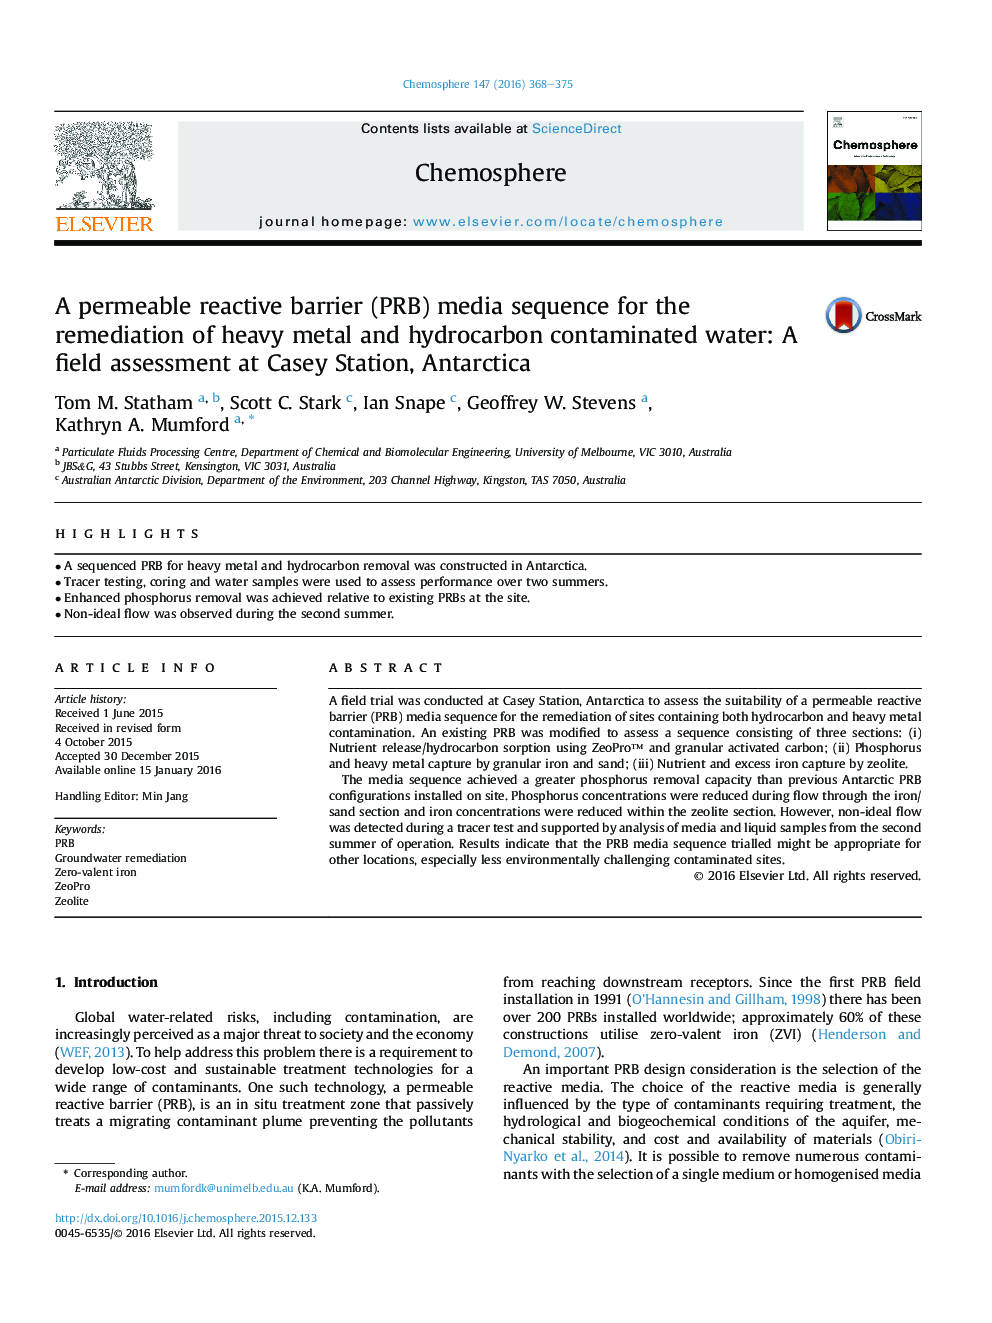 A permeable reactive barrier (PRB) media sequence for the remediation of heavy metal and hydrocarbon contaminated water: A field assessment at Casey Station, Antarctica